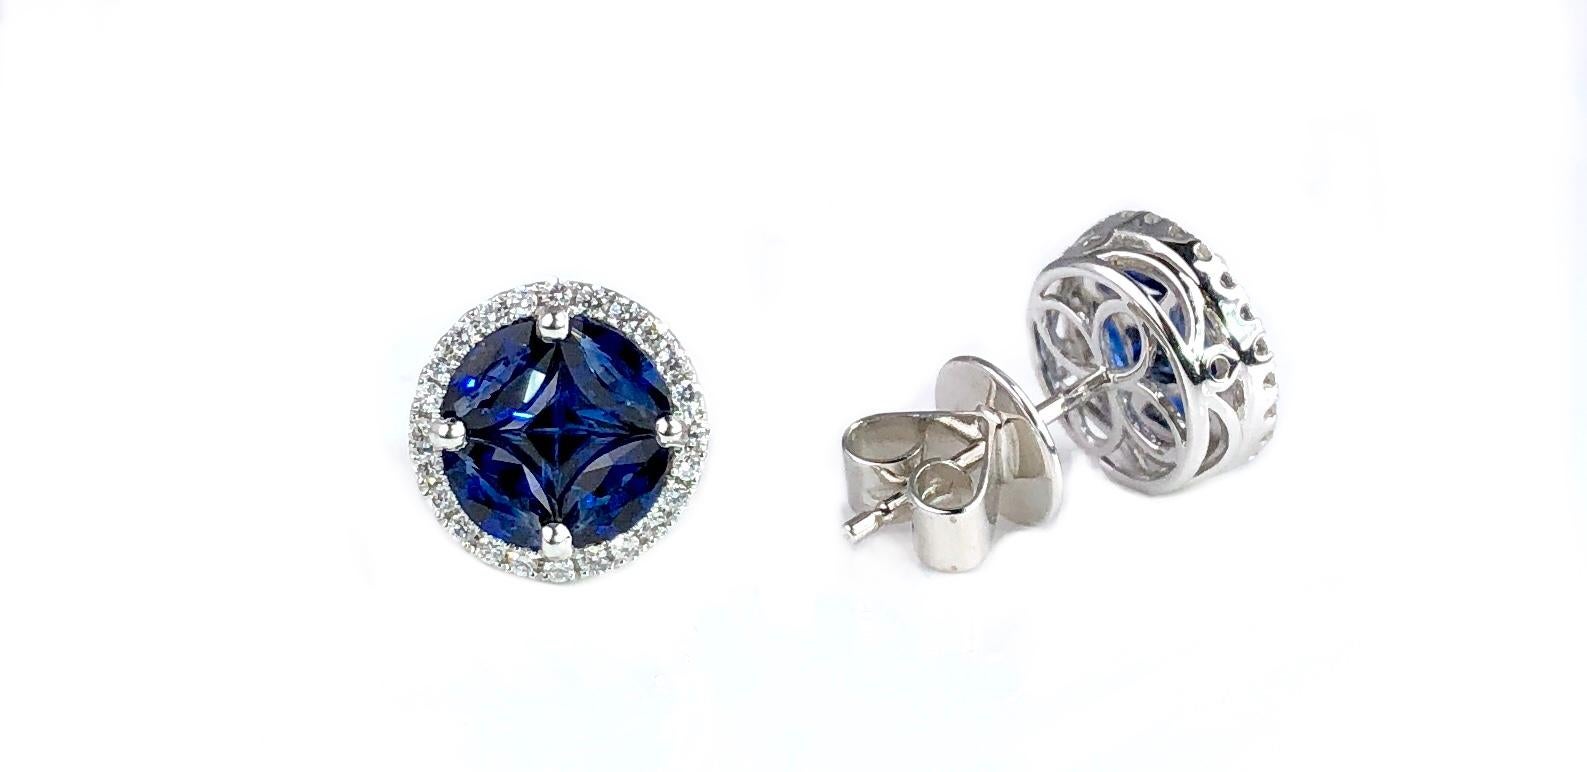 (DiamondTown) These round stud earrings feature a cluster center of blue sapphires (total weight 1.79 carats), surrounded by a halo of round white diamonds (total weight 0.22 carats).

Set in 18k White Gold

A matching bracelet and pendant are